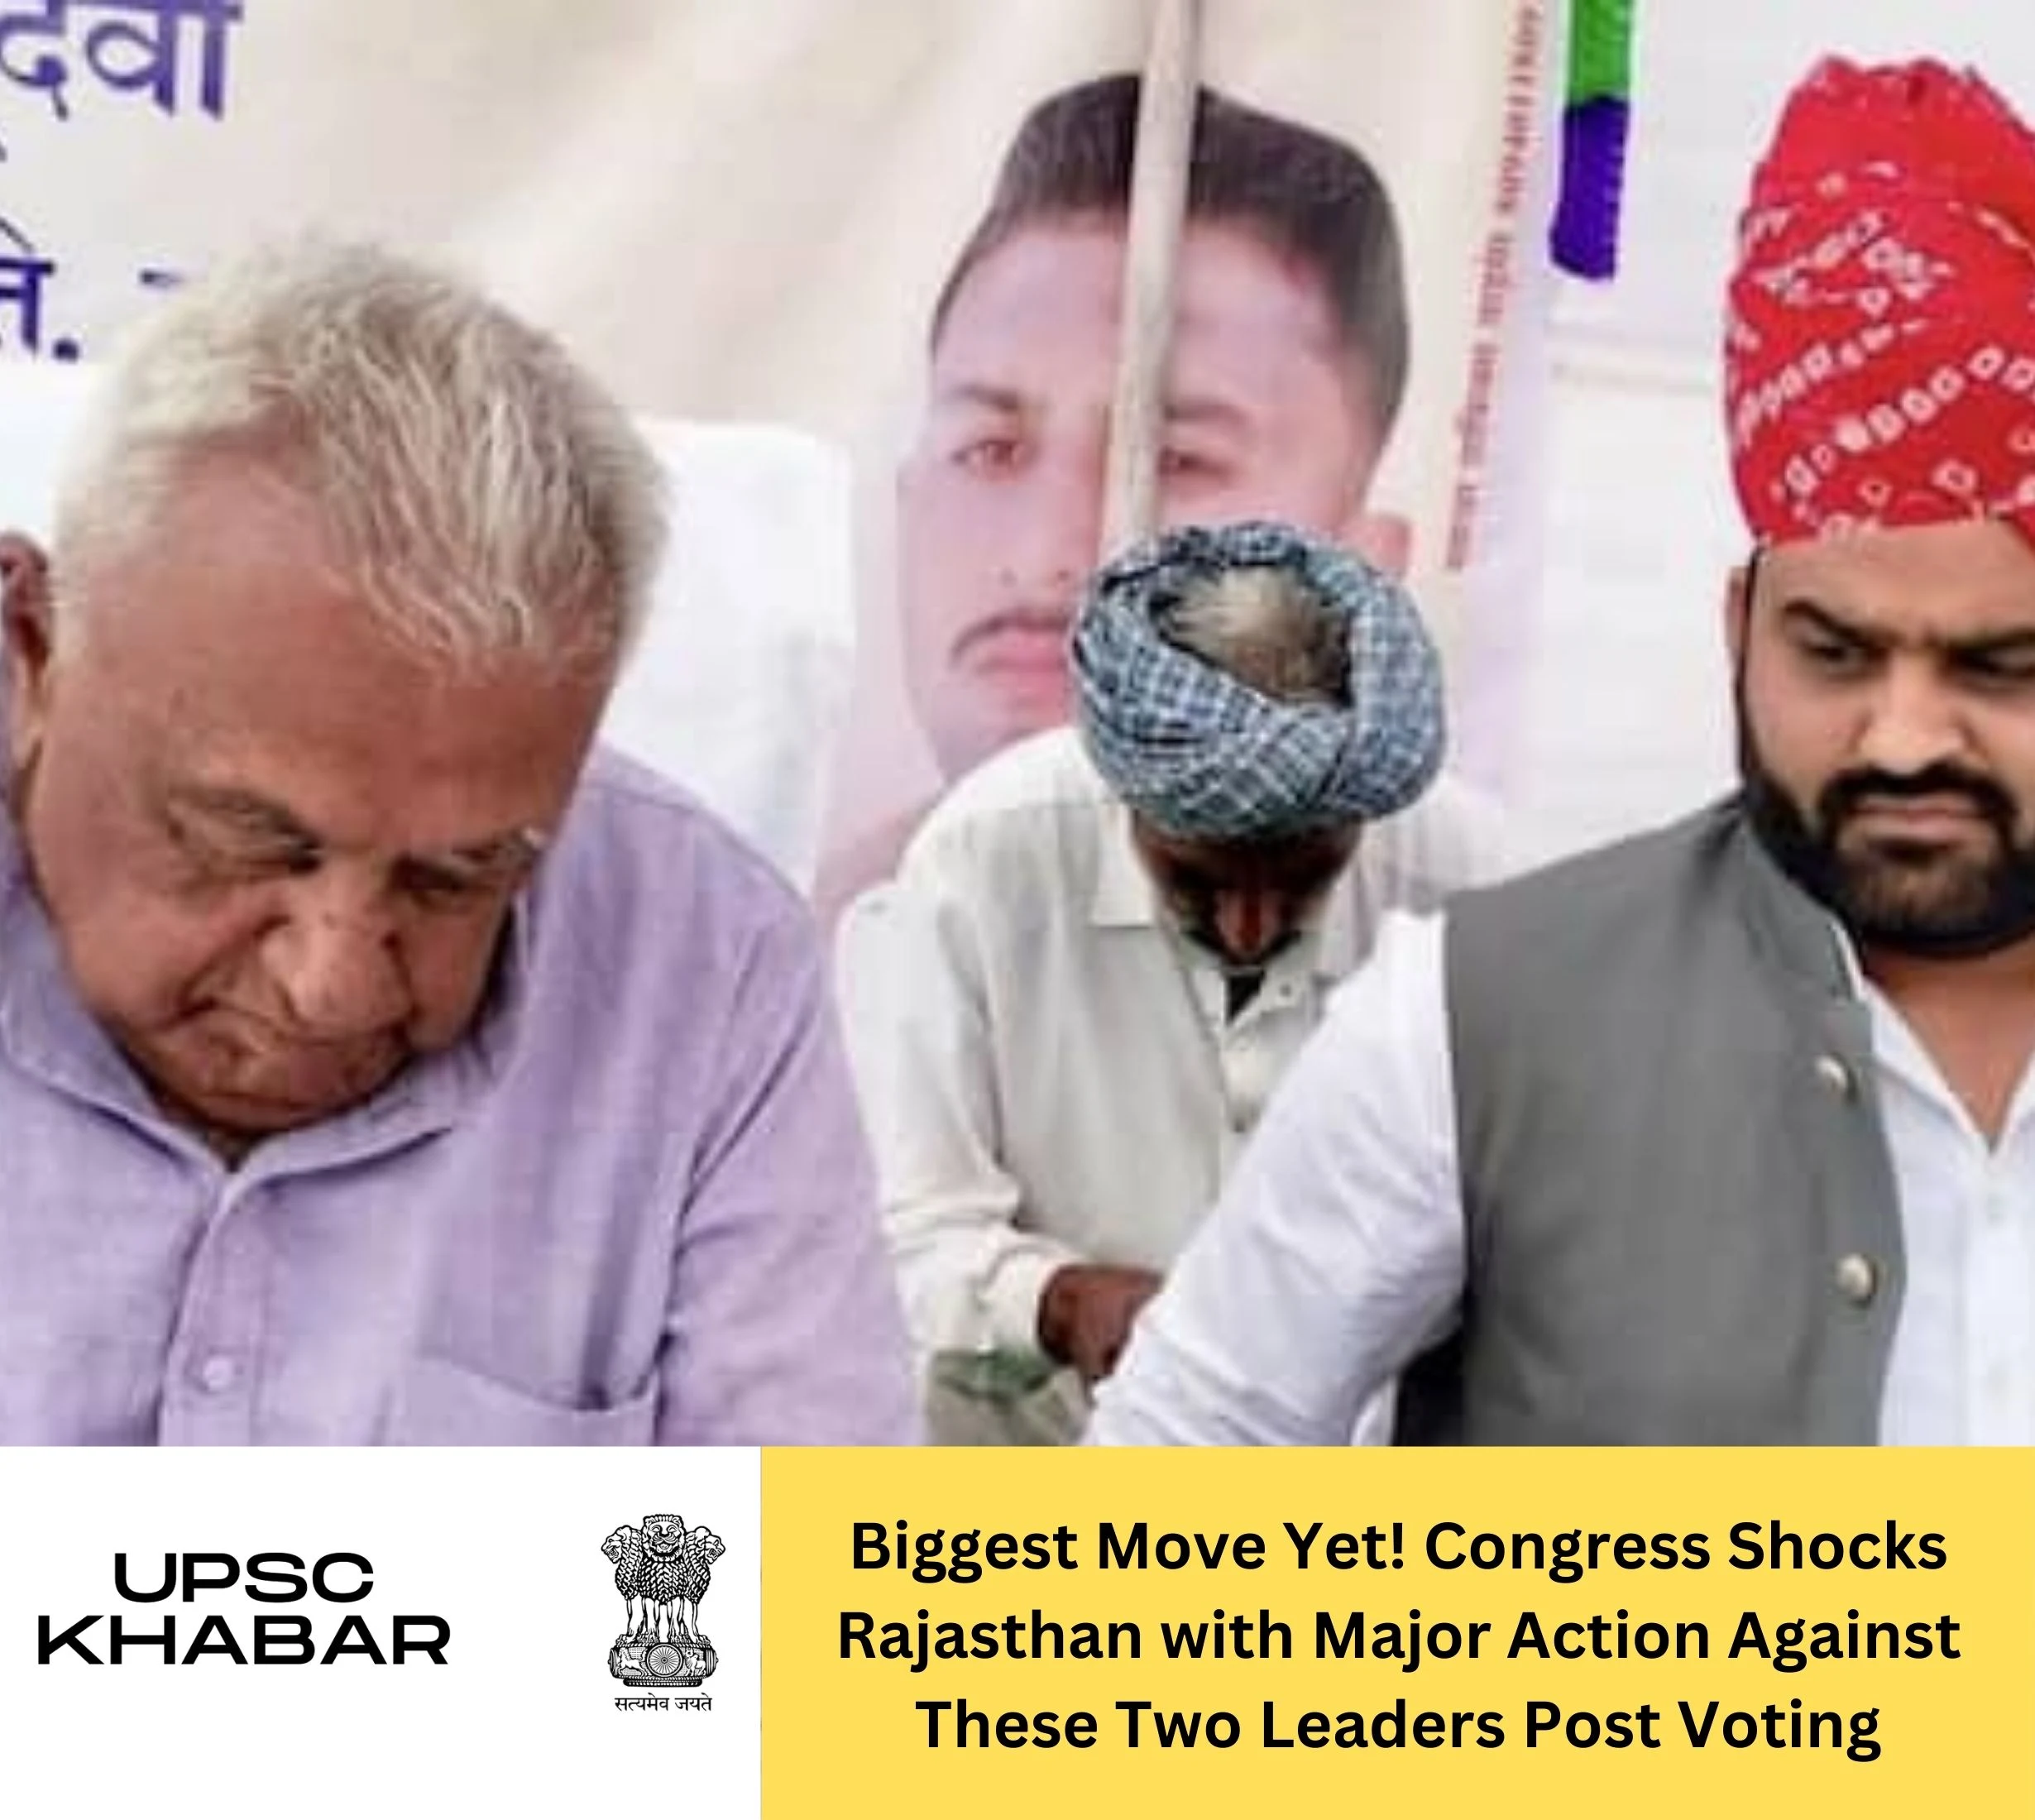 Biggest Move Yet! Congress Shocks Rajasthan with Major Action Against These Two Leaders Post Voting